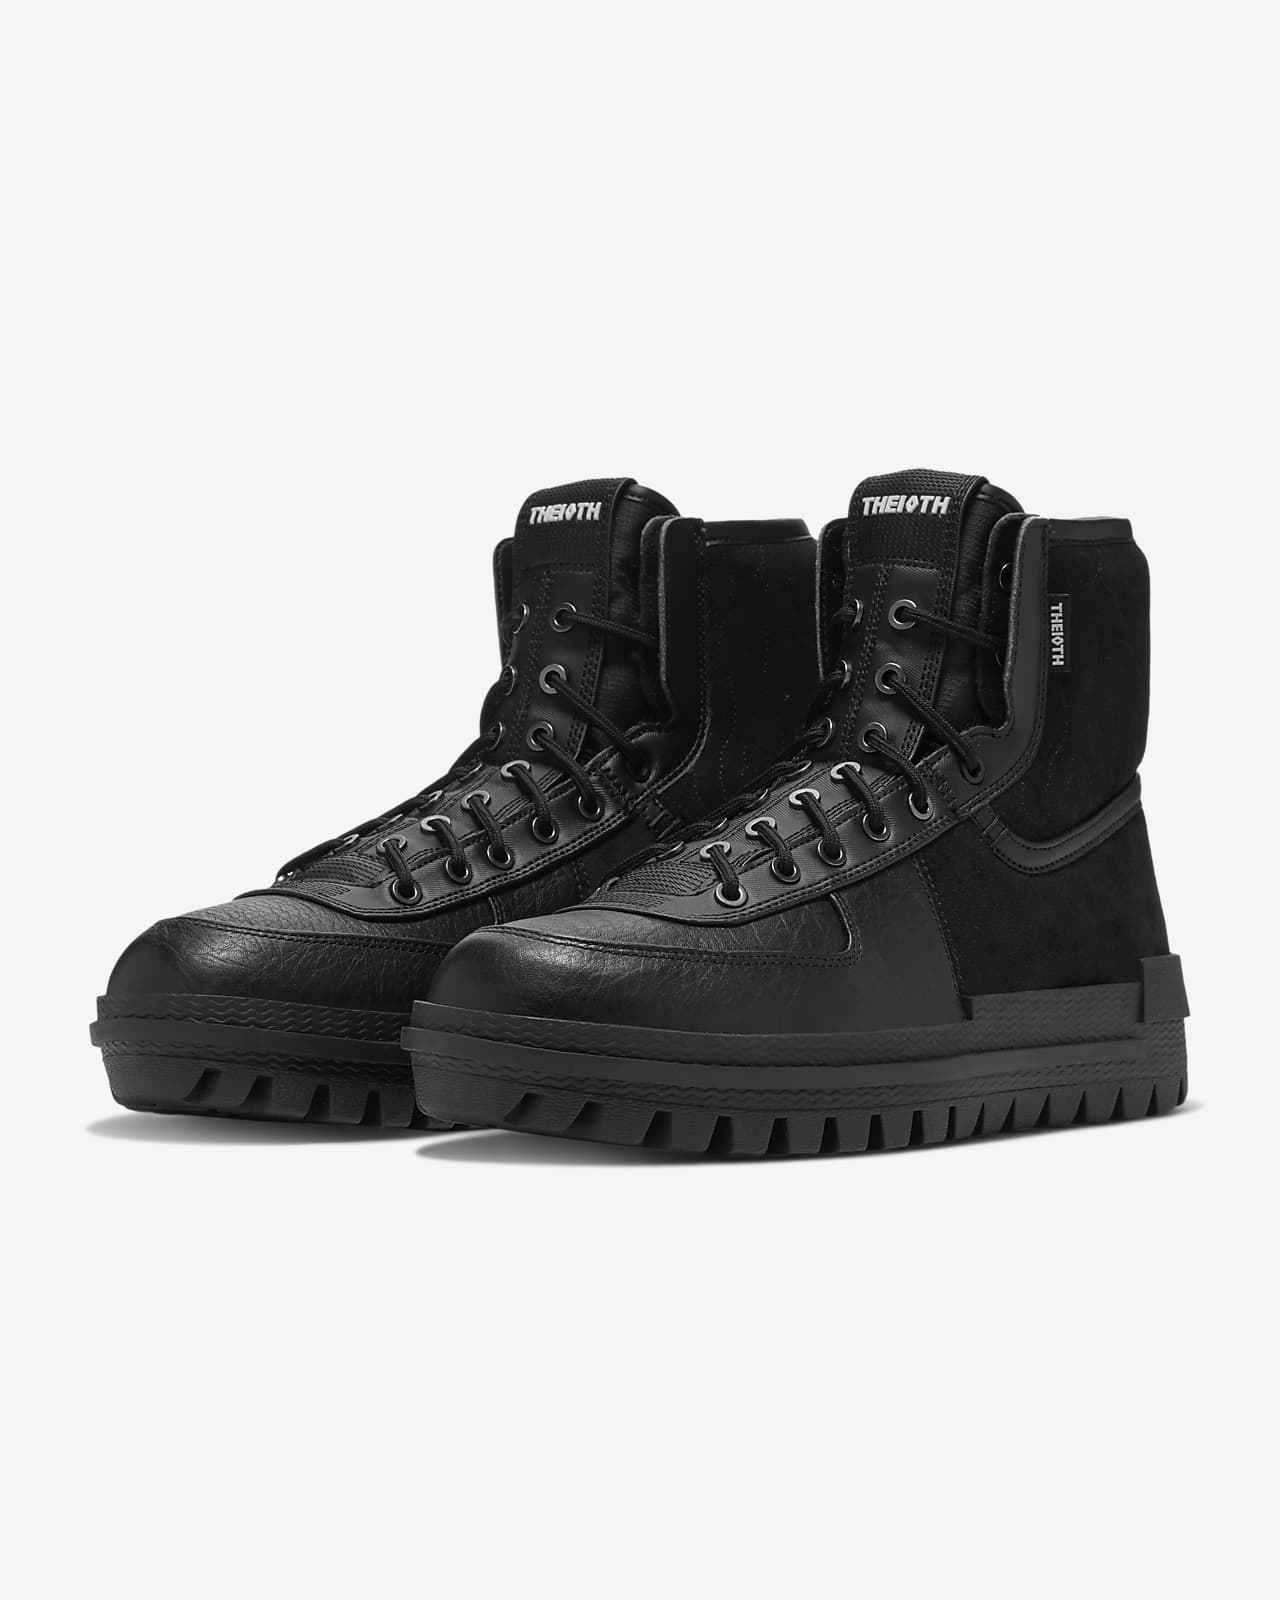 nike theioth boots